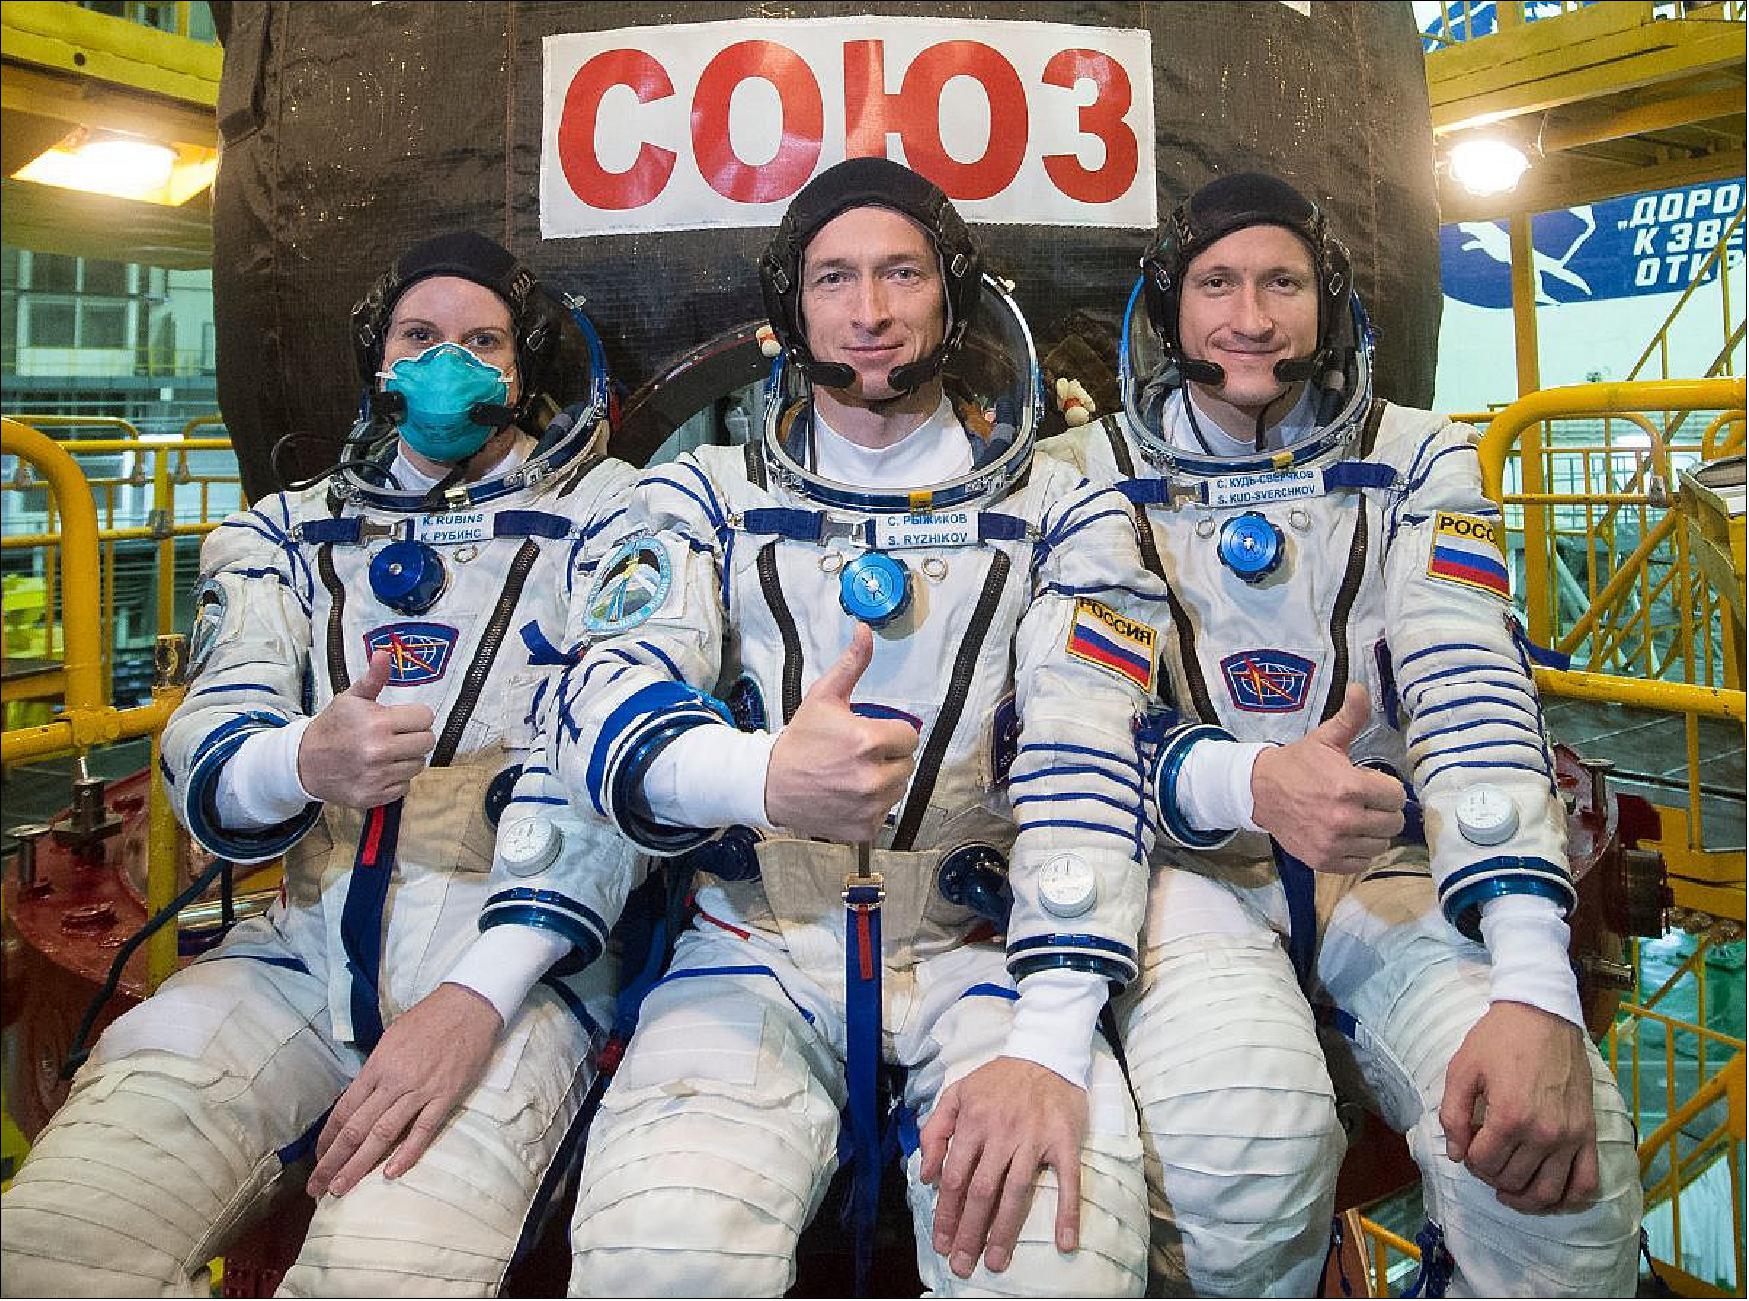 Figure 34: Expedition 64 crew members (from left) Kate Rubins of NASA and Sergey Ryzhikov and Sergey Kud-Sverchkov of Roscosmos in front of the Soyuz MS-17 spacecraft (image credit: image credit: Roscosmos)